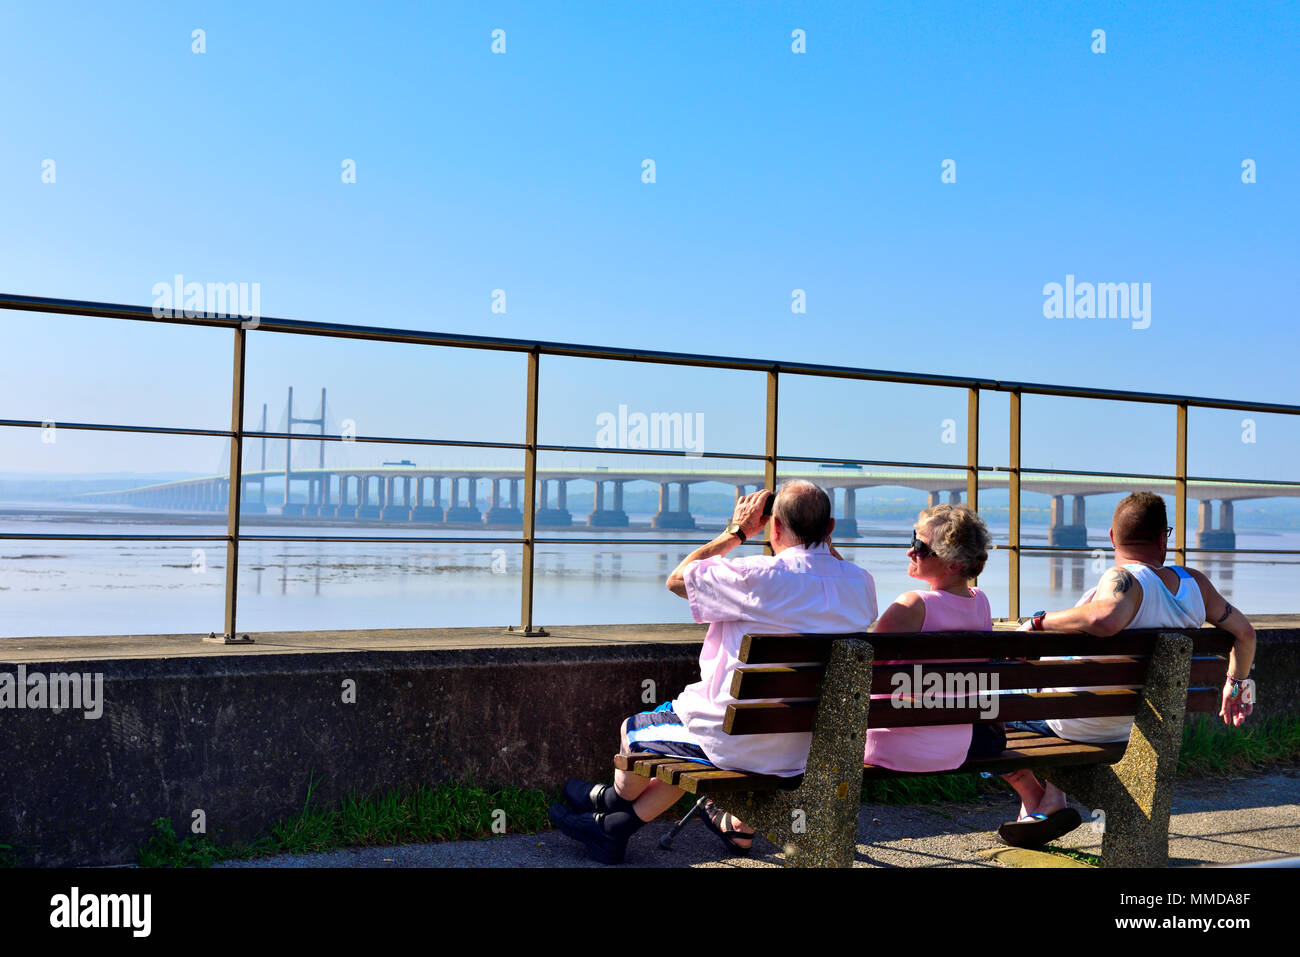 People on seat overlooking Severn Estuary with M4, Second Severn Crossing bridge Stock Photo